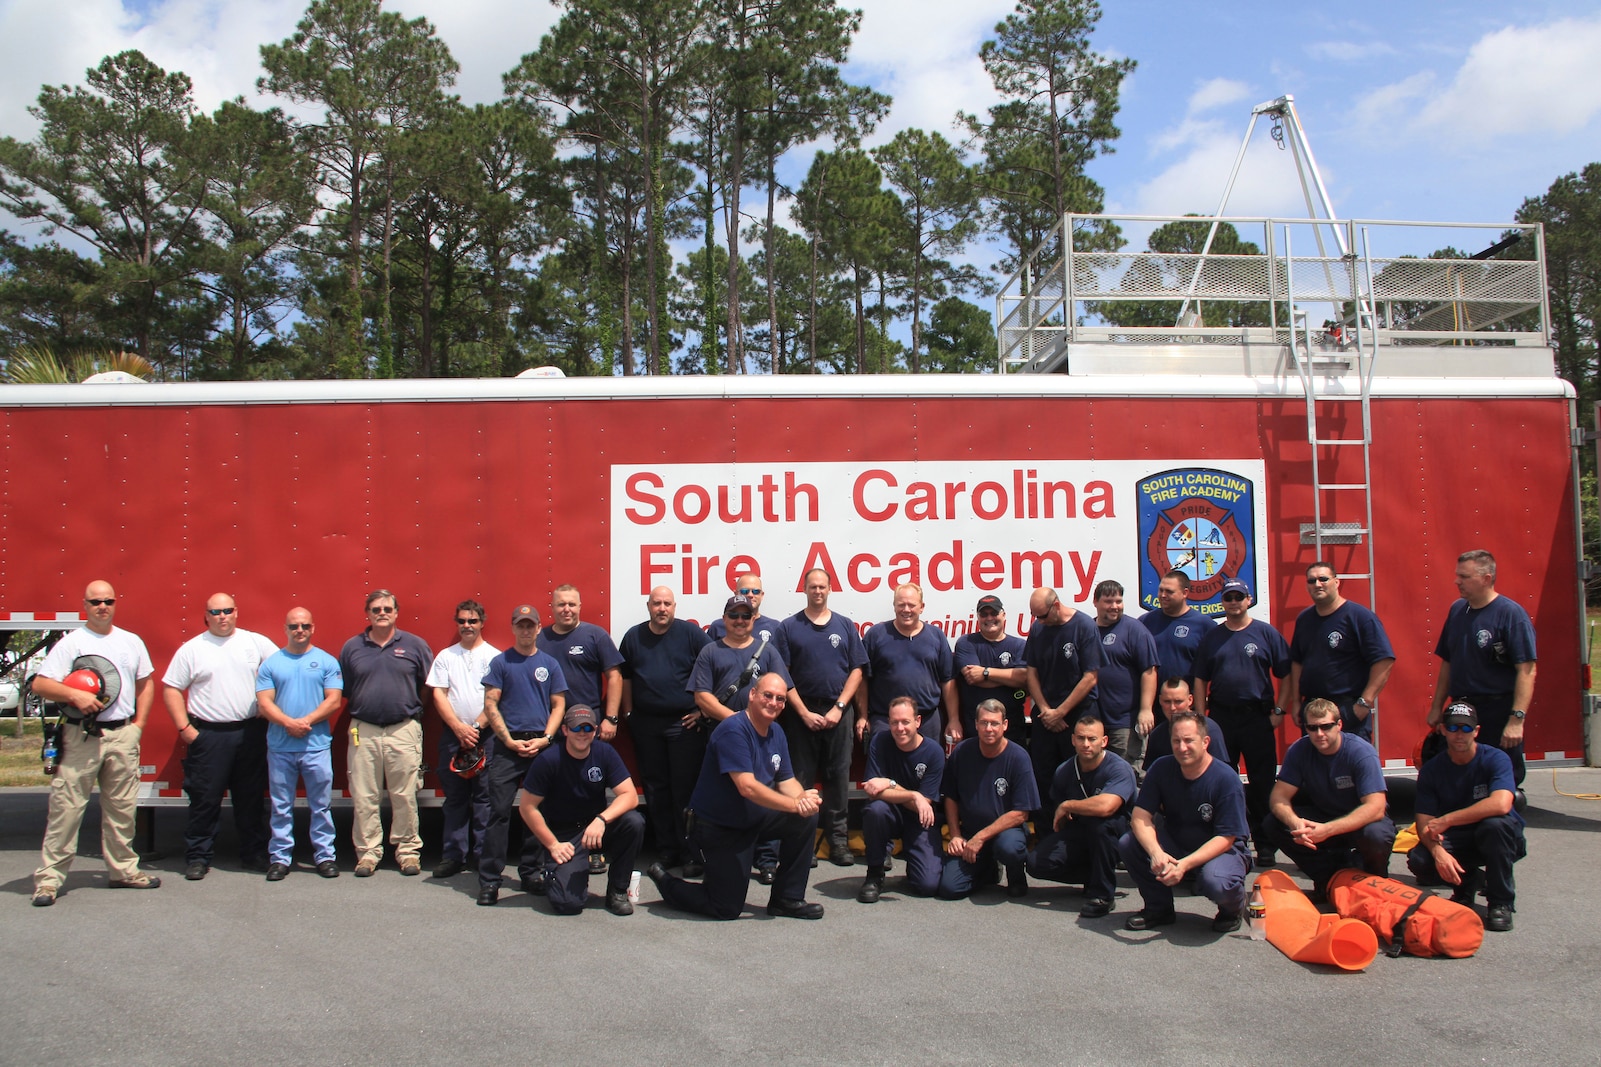 MARINE CORPS AIR STATION BEAUFORT, S.C. - Air Station firefighters and instructors stand next to one of the trailers used in the training exercise April 18 at the Structural Fire Department. The trailer contains a course with various obstacles and small spaces that the firefighters had to maneuver through. 